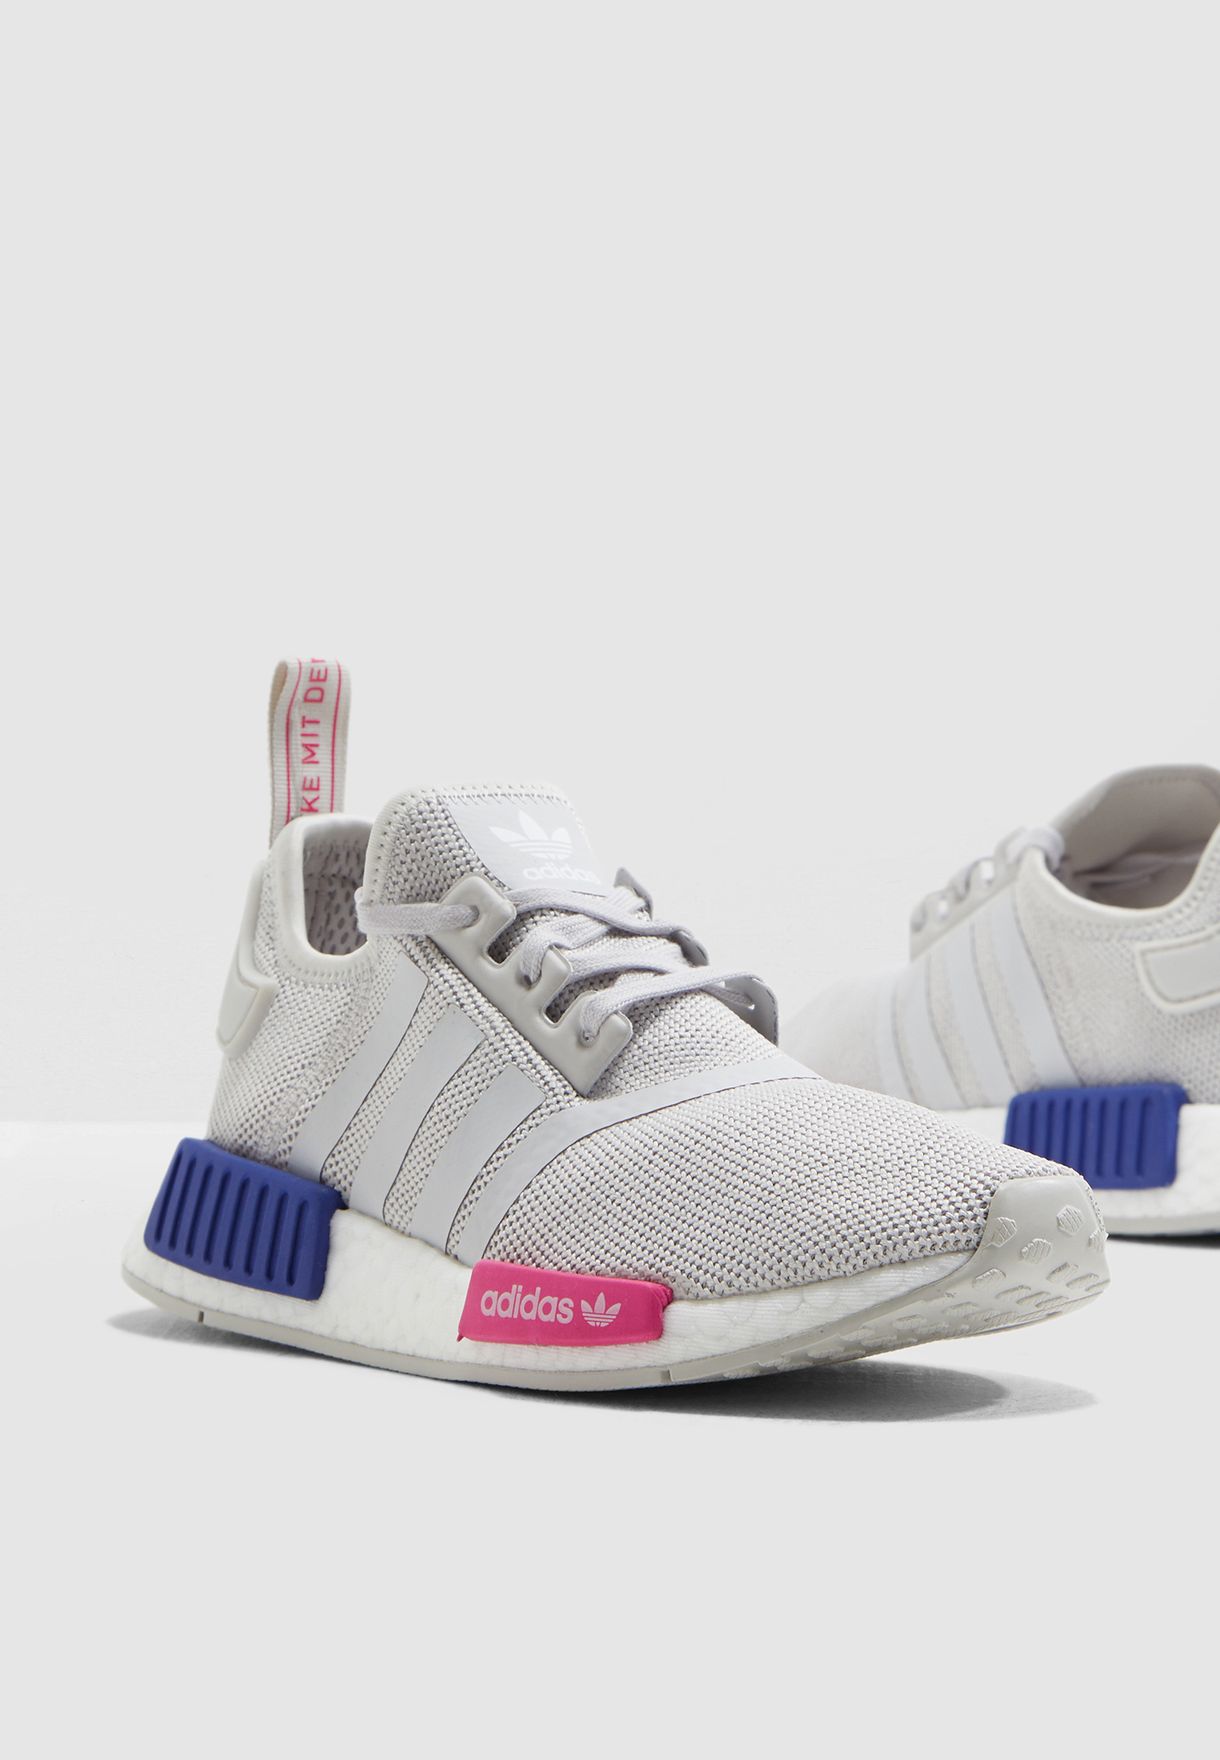 youth originals nmd_r1 shoes